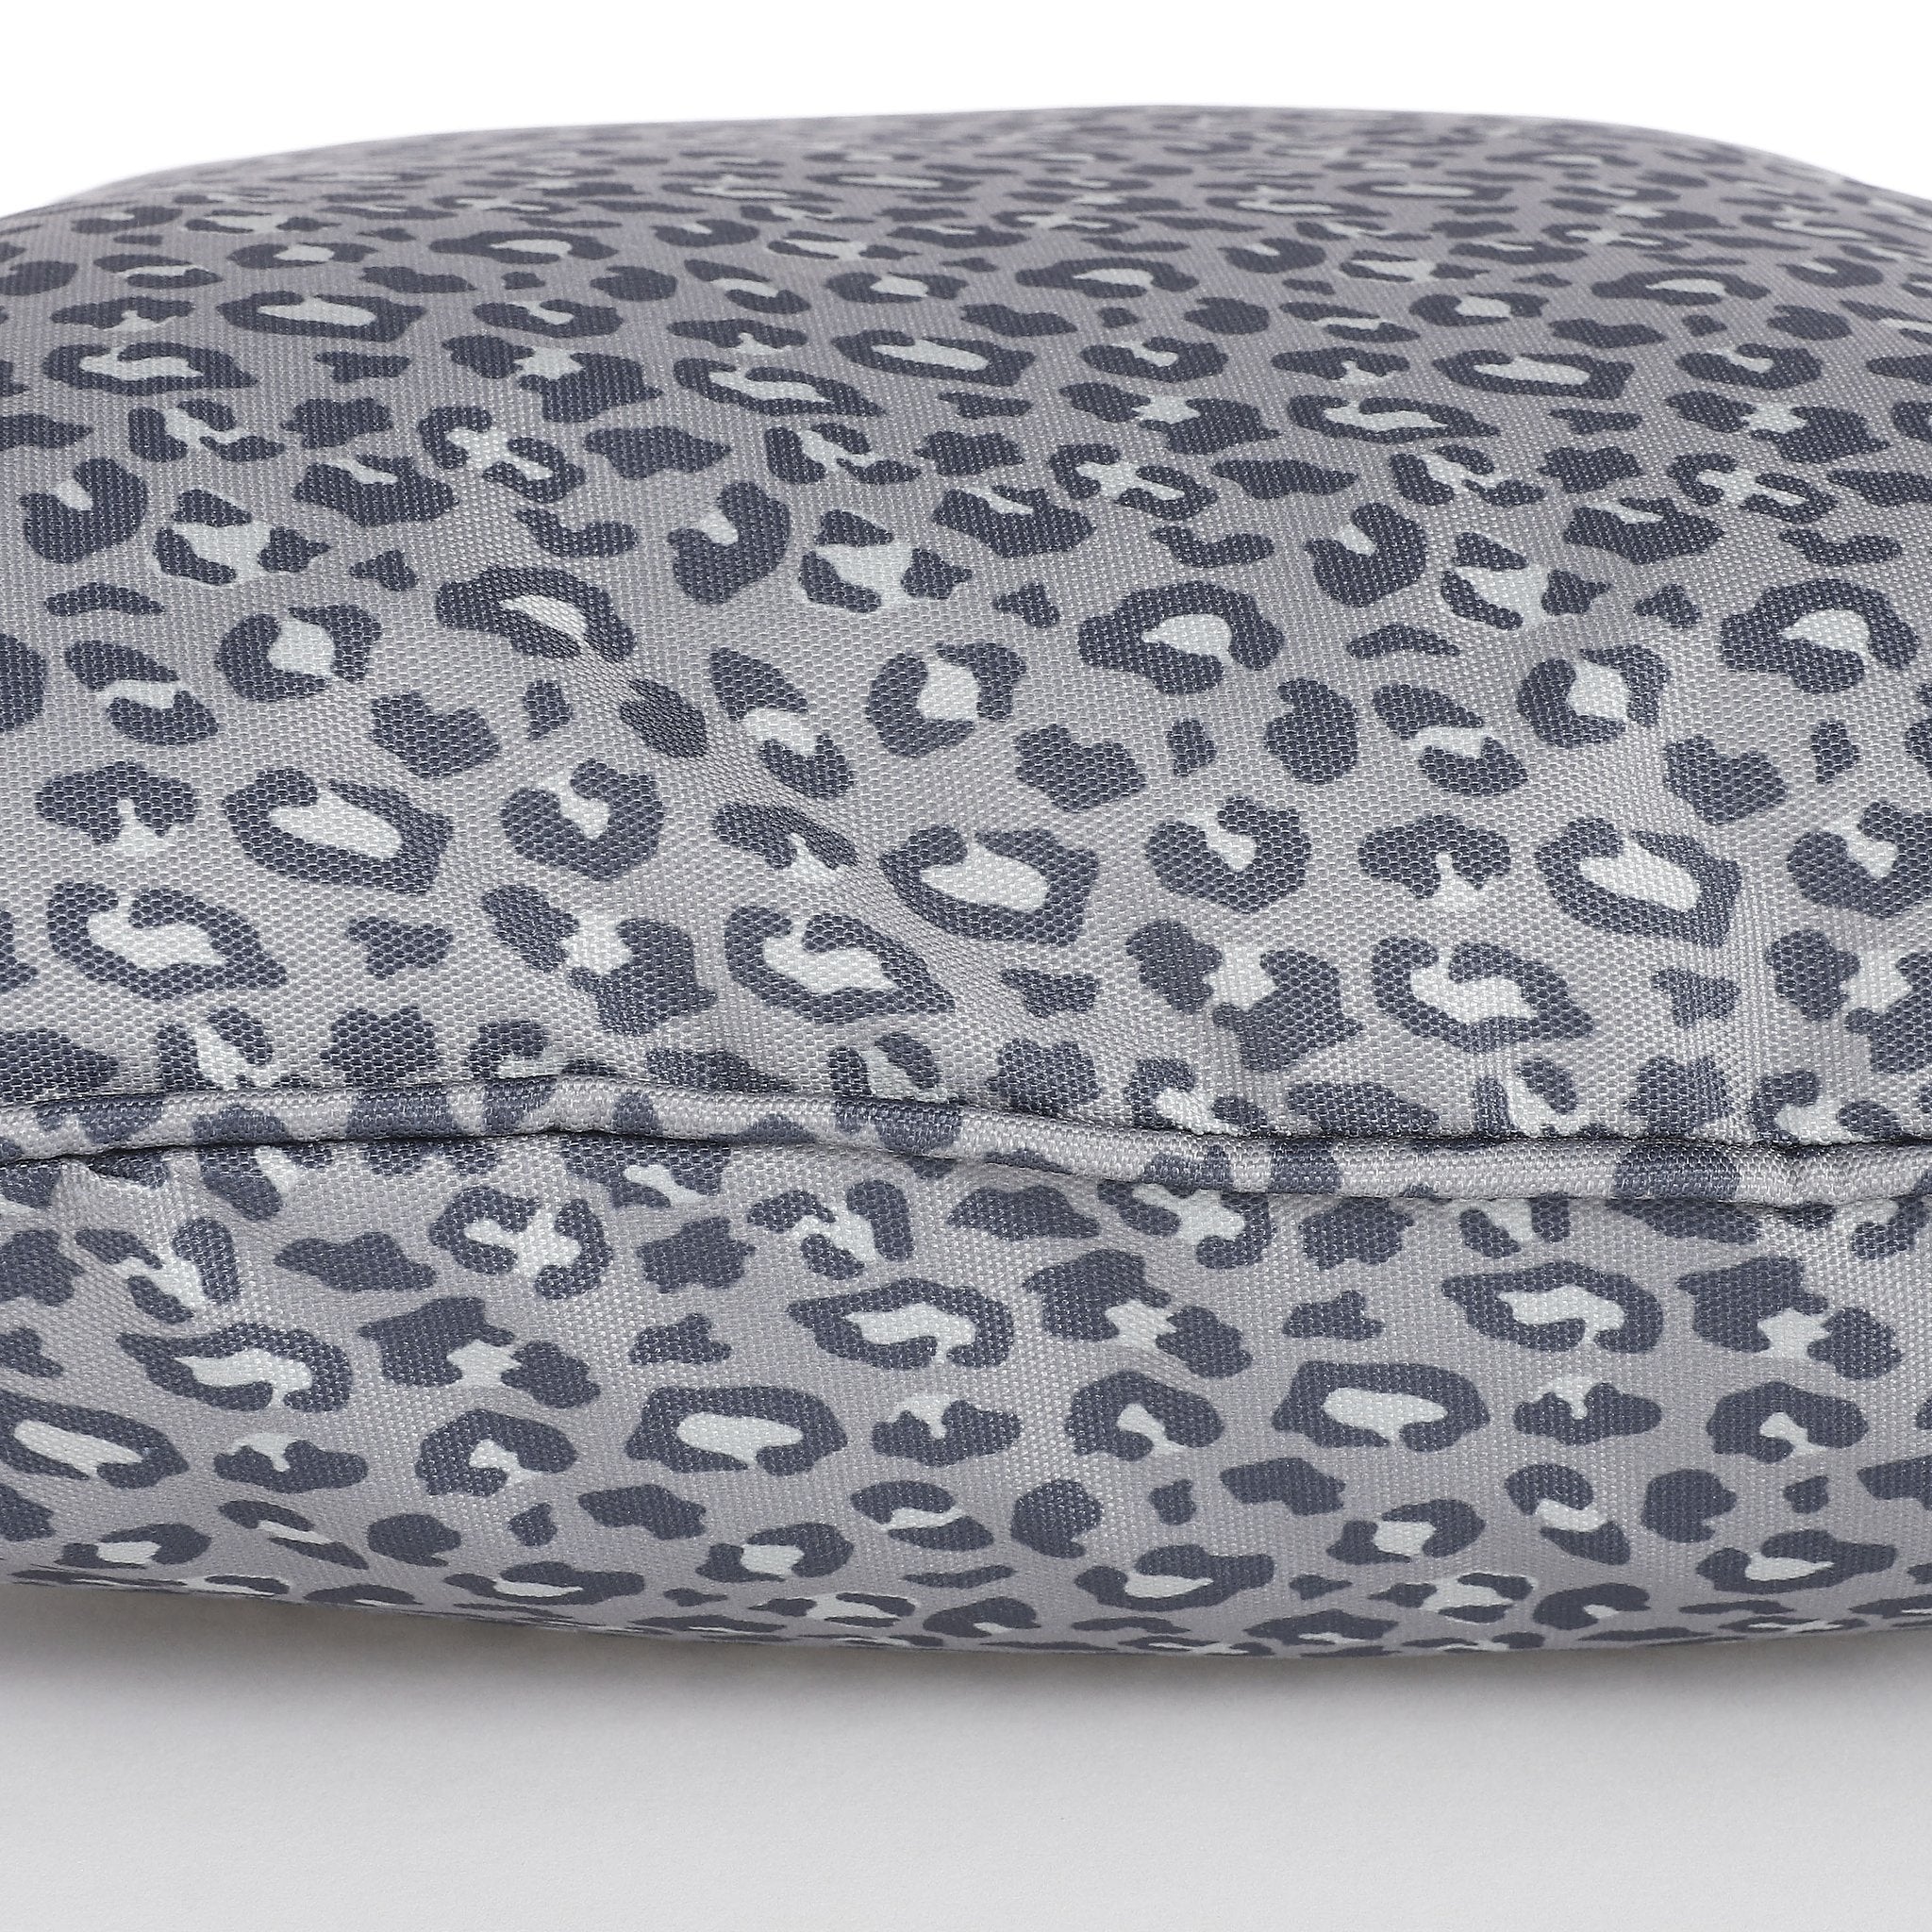 In The Mood Collection Panthera Outdoor Cushion - L45 x W45 x H10 cm - Grey